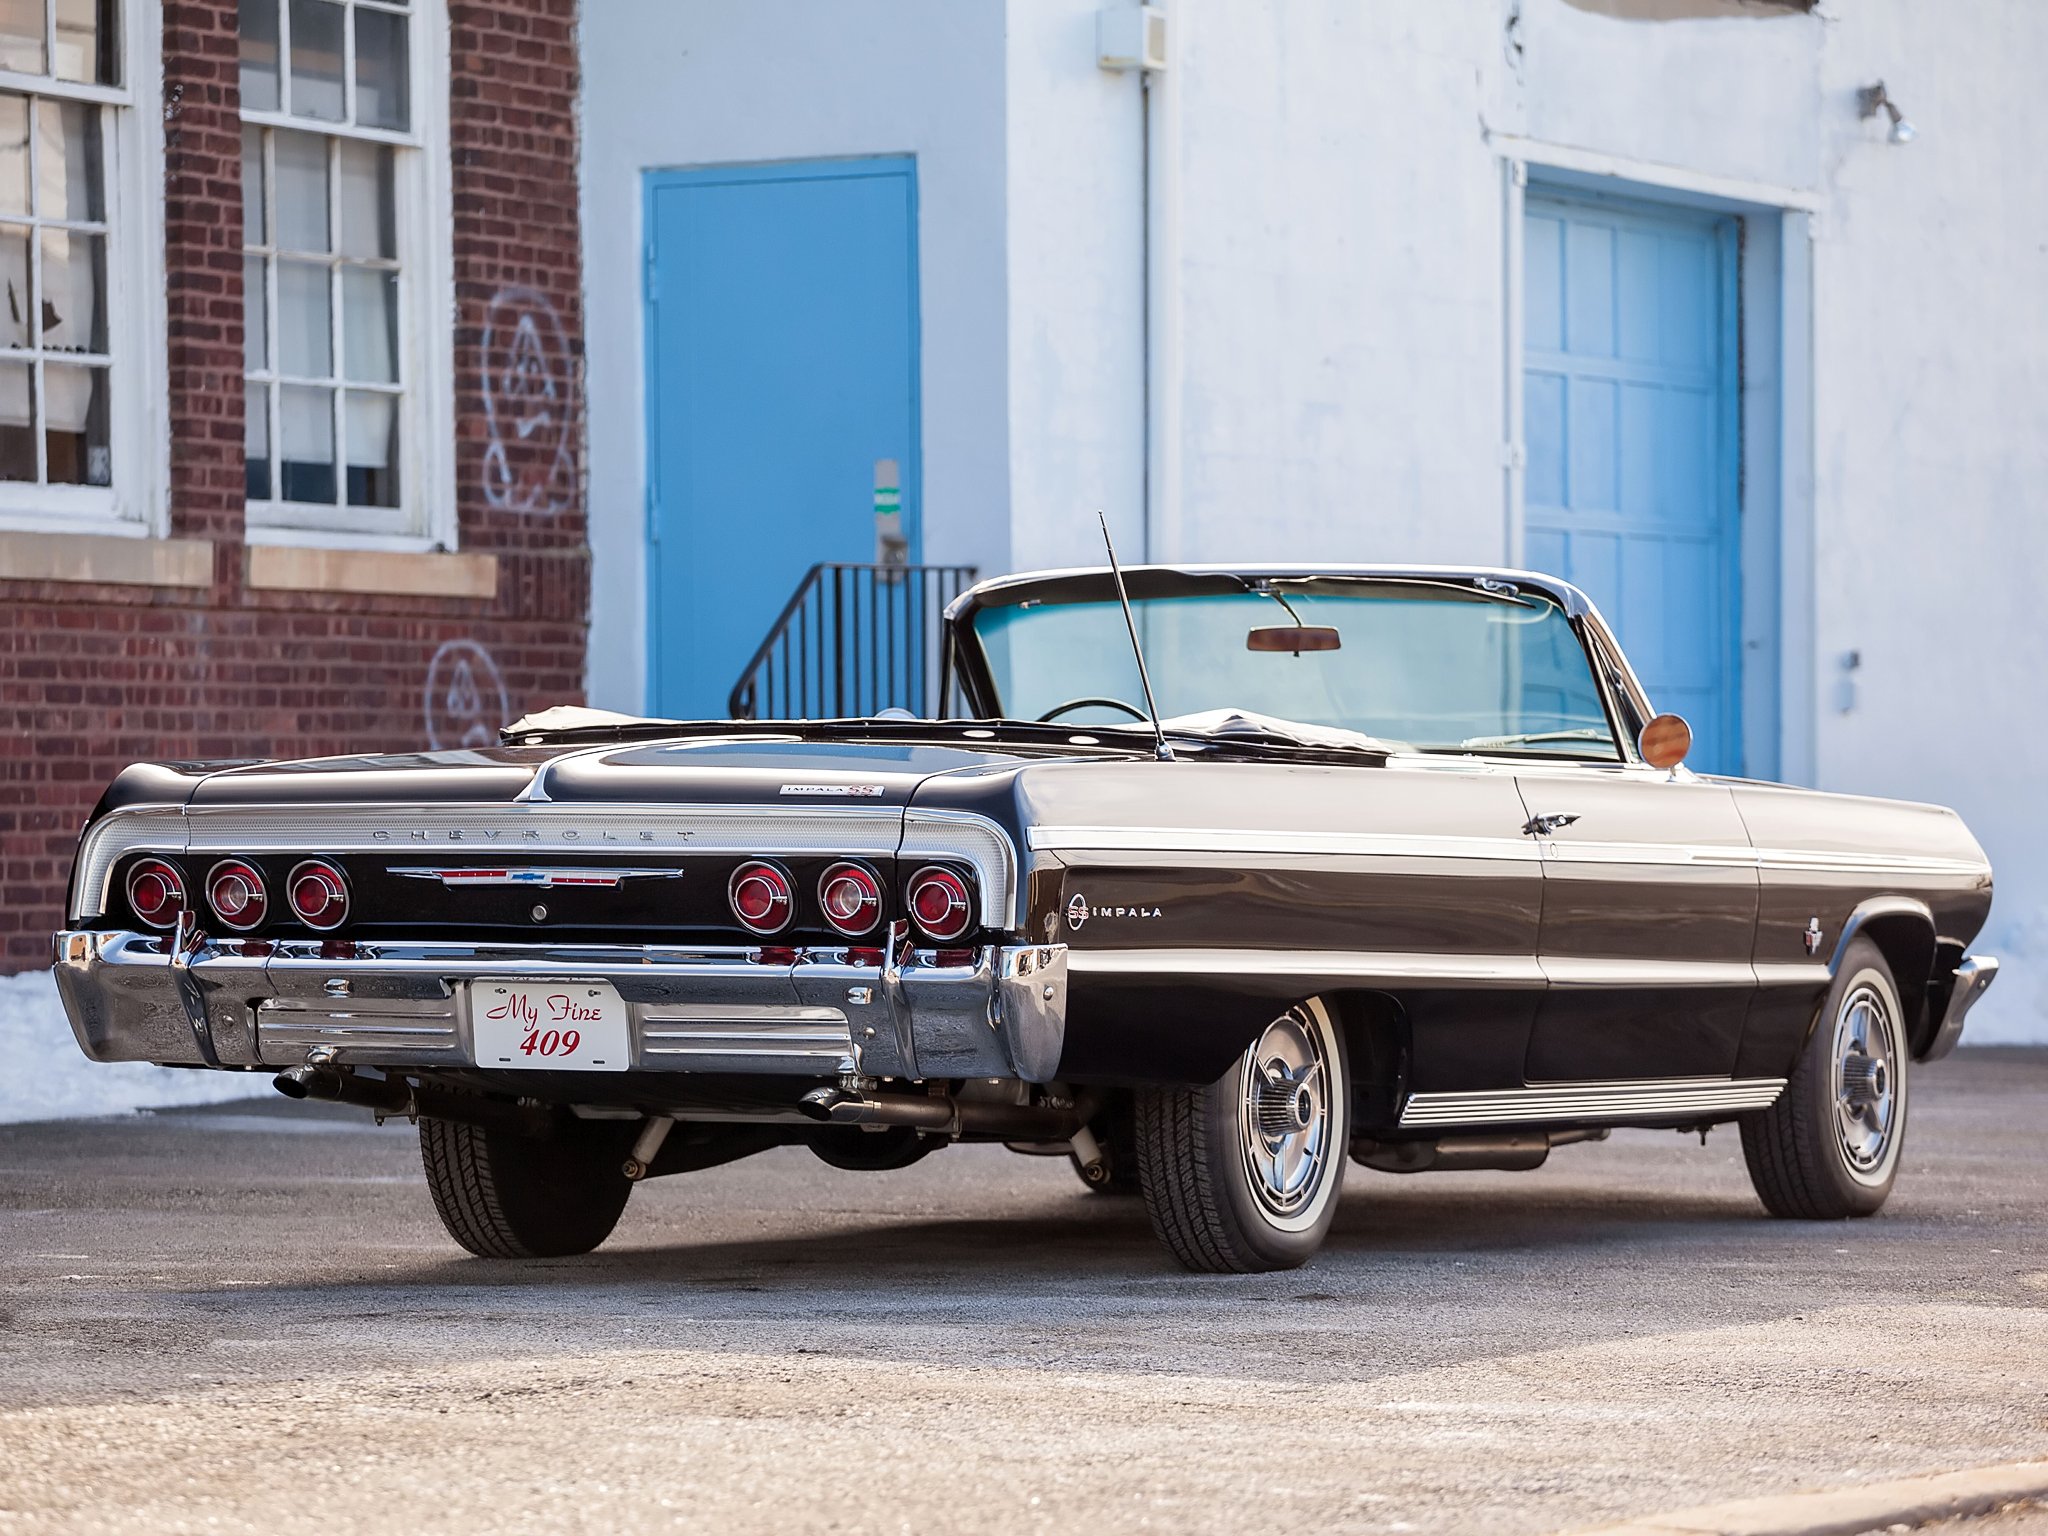 1964, Chevrolet, Impala, S s, 409, Convertible, Muscle, Classic Wallpaper